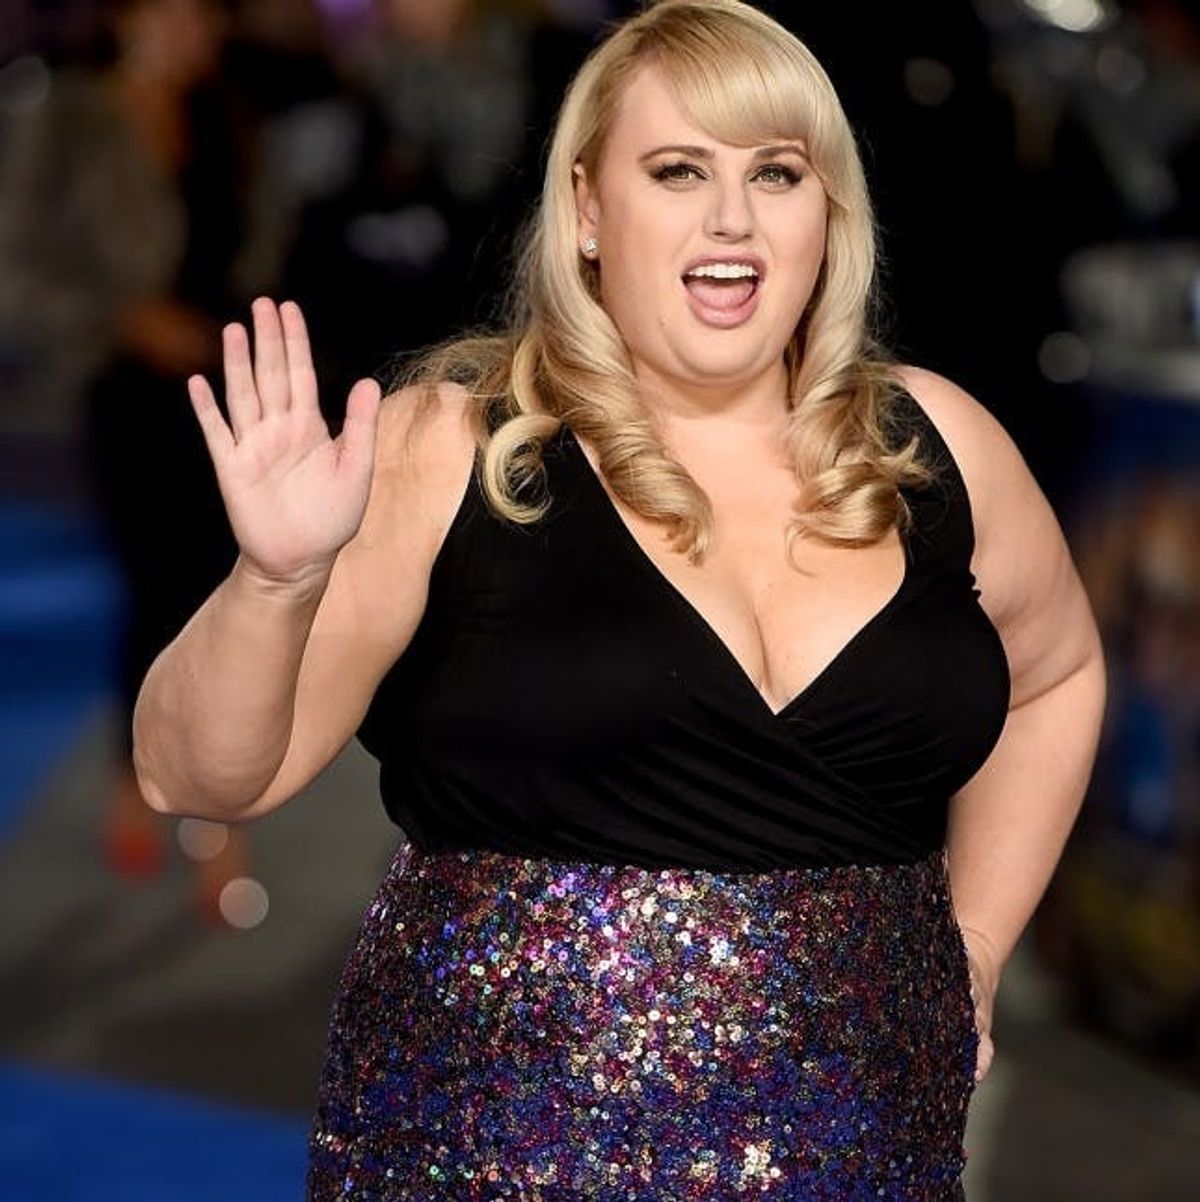 Rebel Wilson + Torrid Is the Plus-Size Collab We’ve Been Waiting For